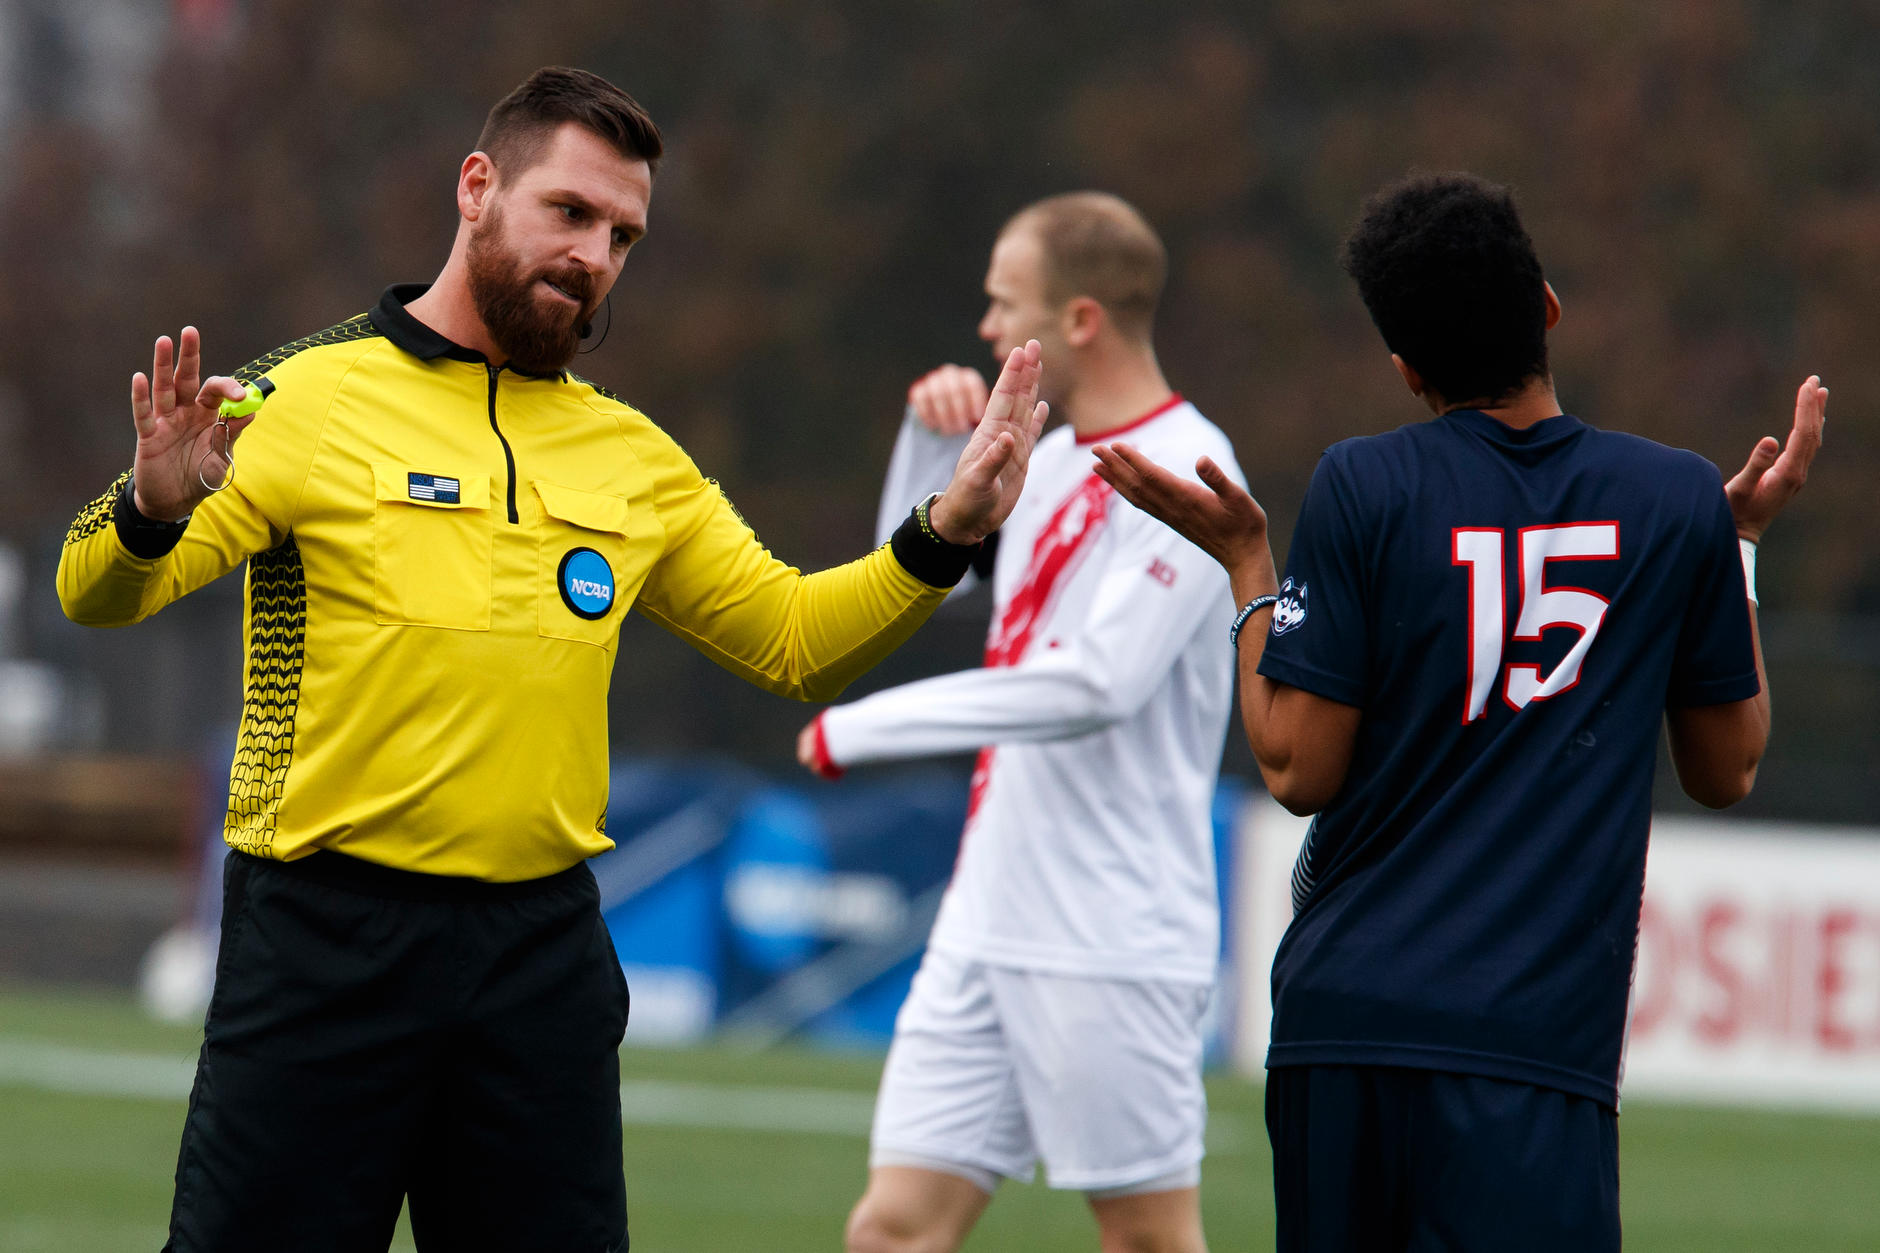 Referee Aaron Hernandez Connecticut's Cole Venner (15) during the second half of an NCAA men's soccer tournament match at Bill Armstrong Stadium in Bloomington, Ind. on Sunday, Nov. 18, 2018. IU won 4-0. (James Brosher for The Herald-Times)